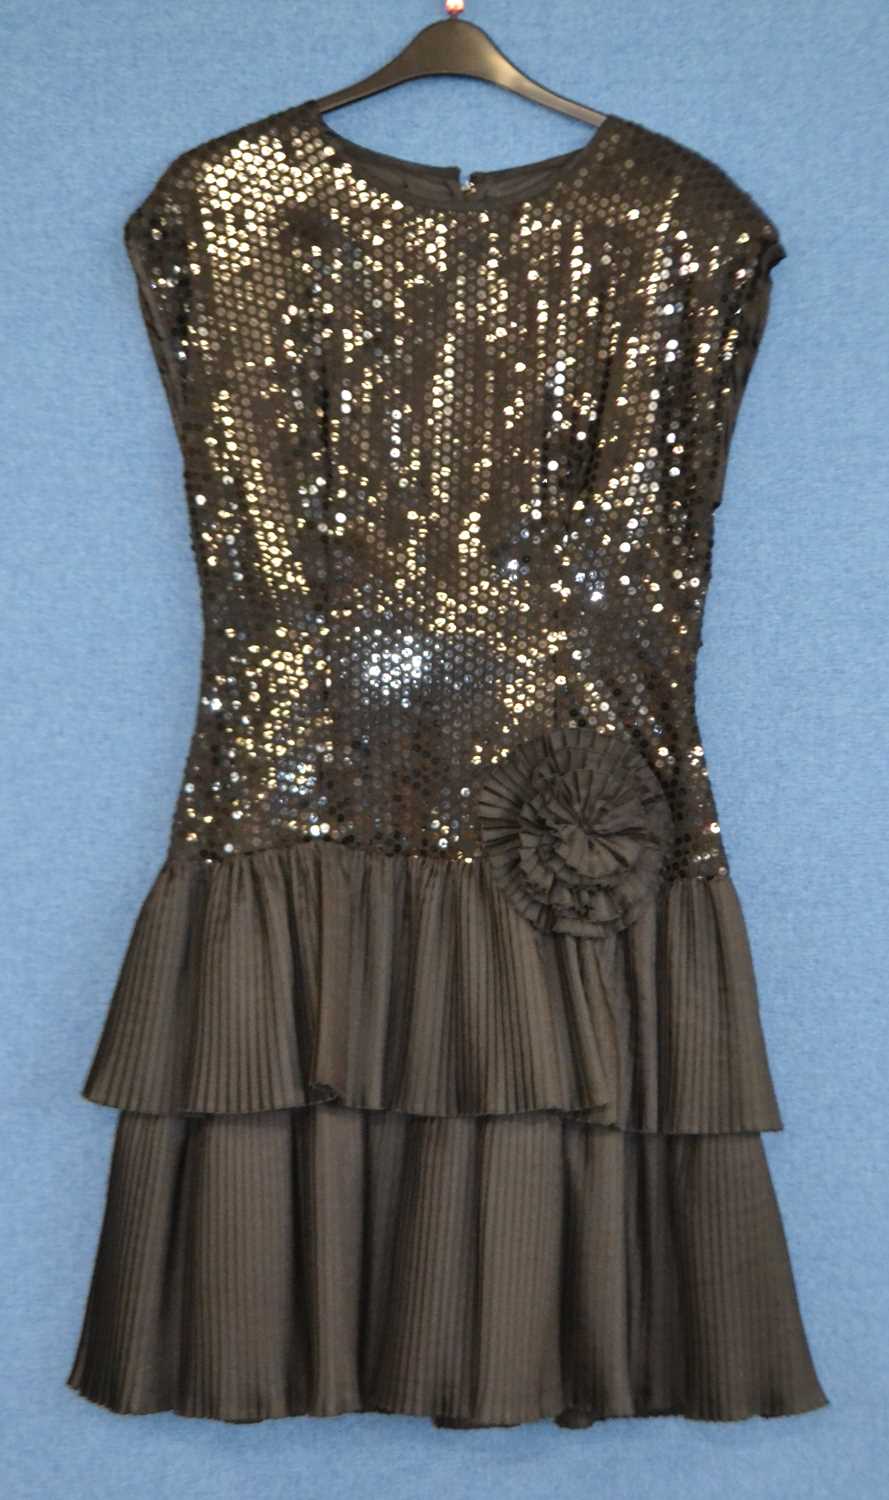 A c.1980's/90's black sequin and ruffled cocktail dress by John Charles, size 14, together with a